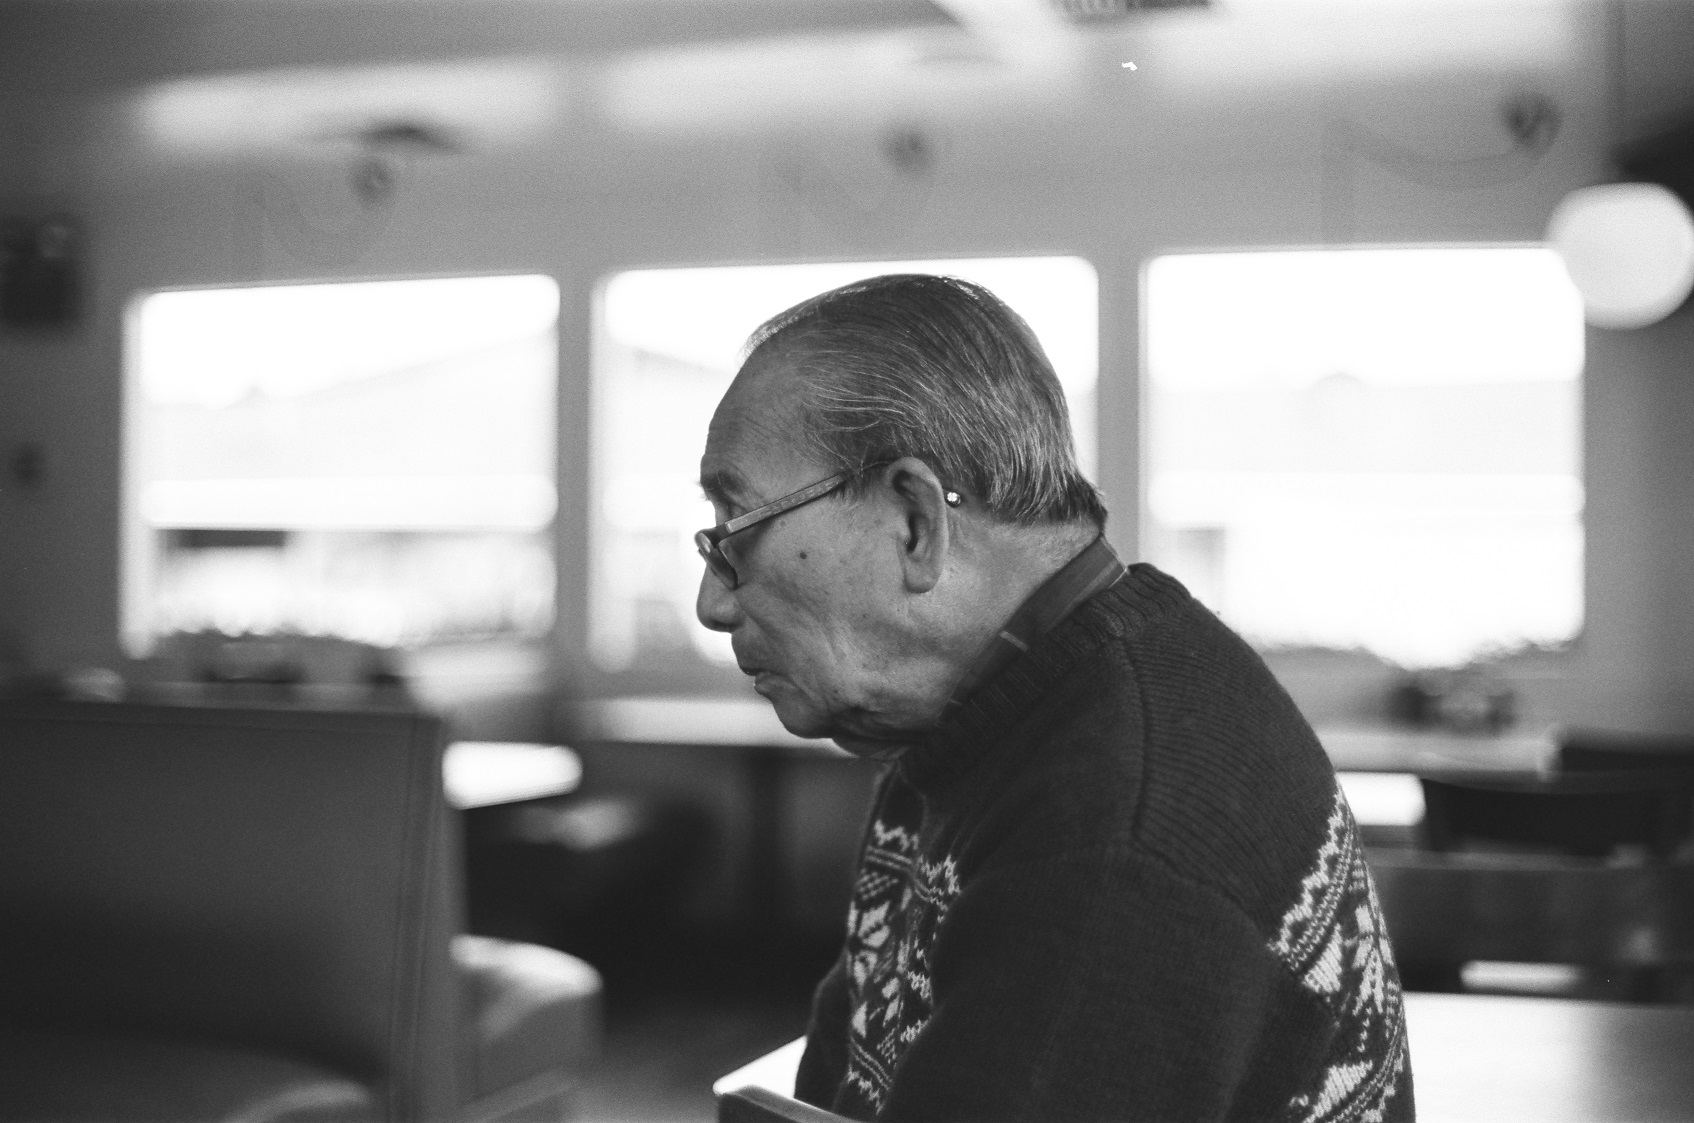 PICTURED: A black and white portrait of the photographer's grandfather in profile. Restaurant booth seating is in the background.